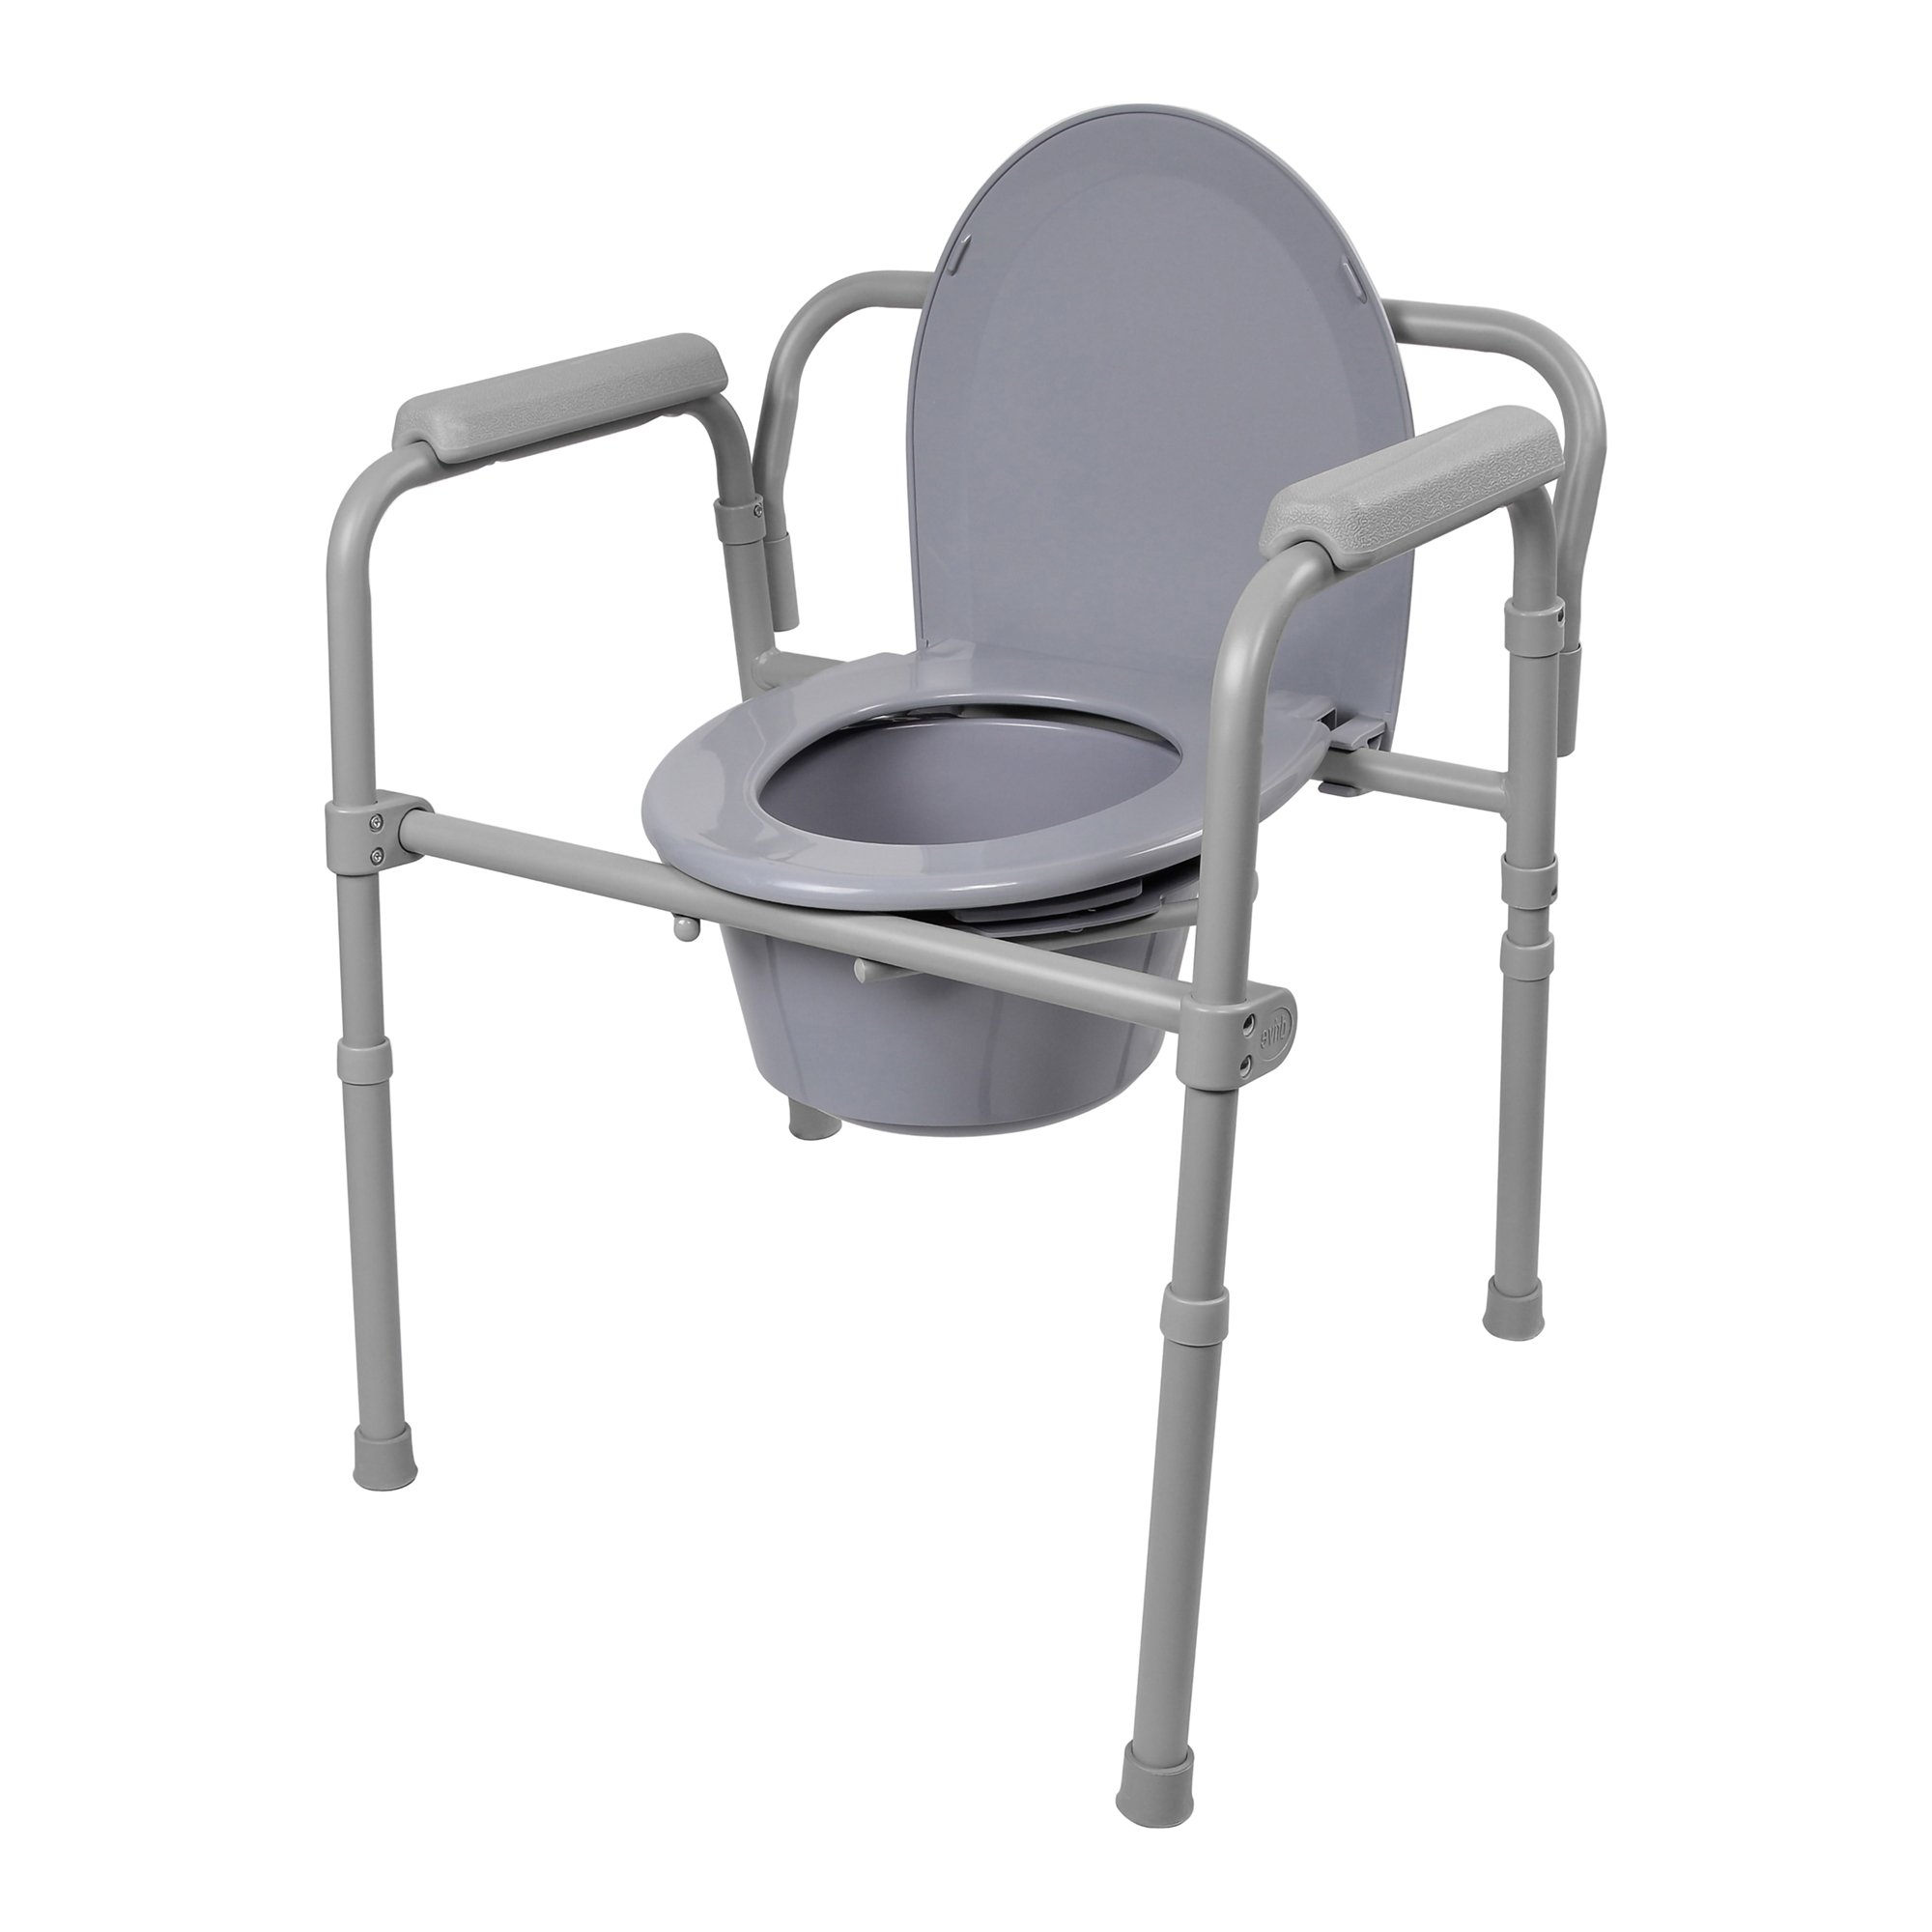 McKesson Commode Chair 13-1/2 Inch Seat Width 350 lbs. Weight Capacity, Gray